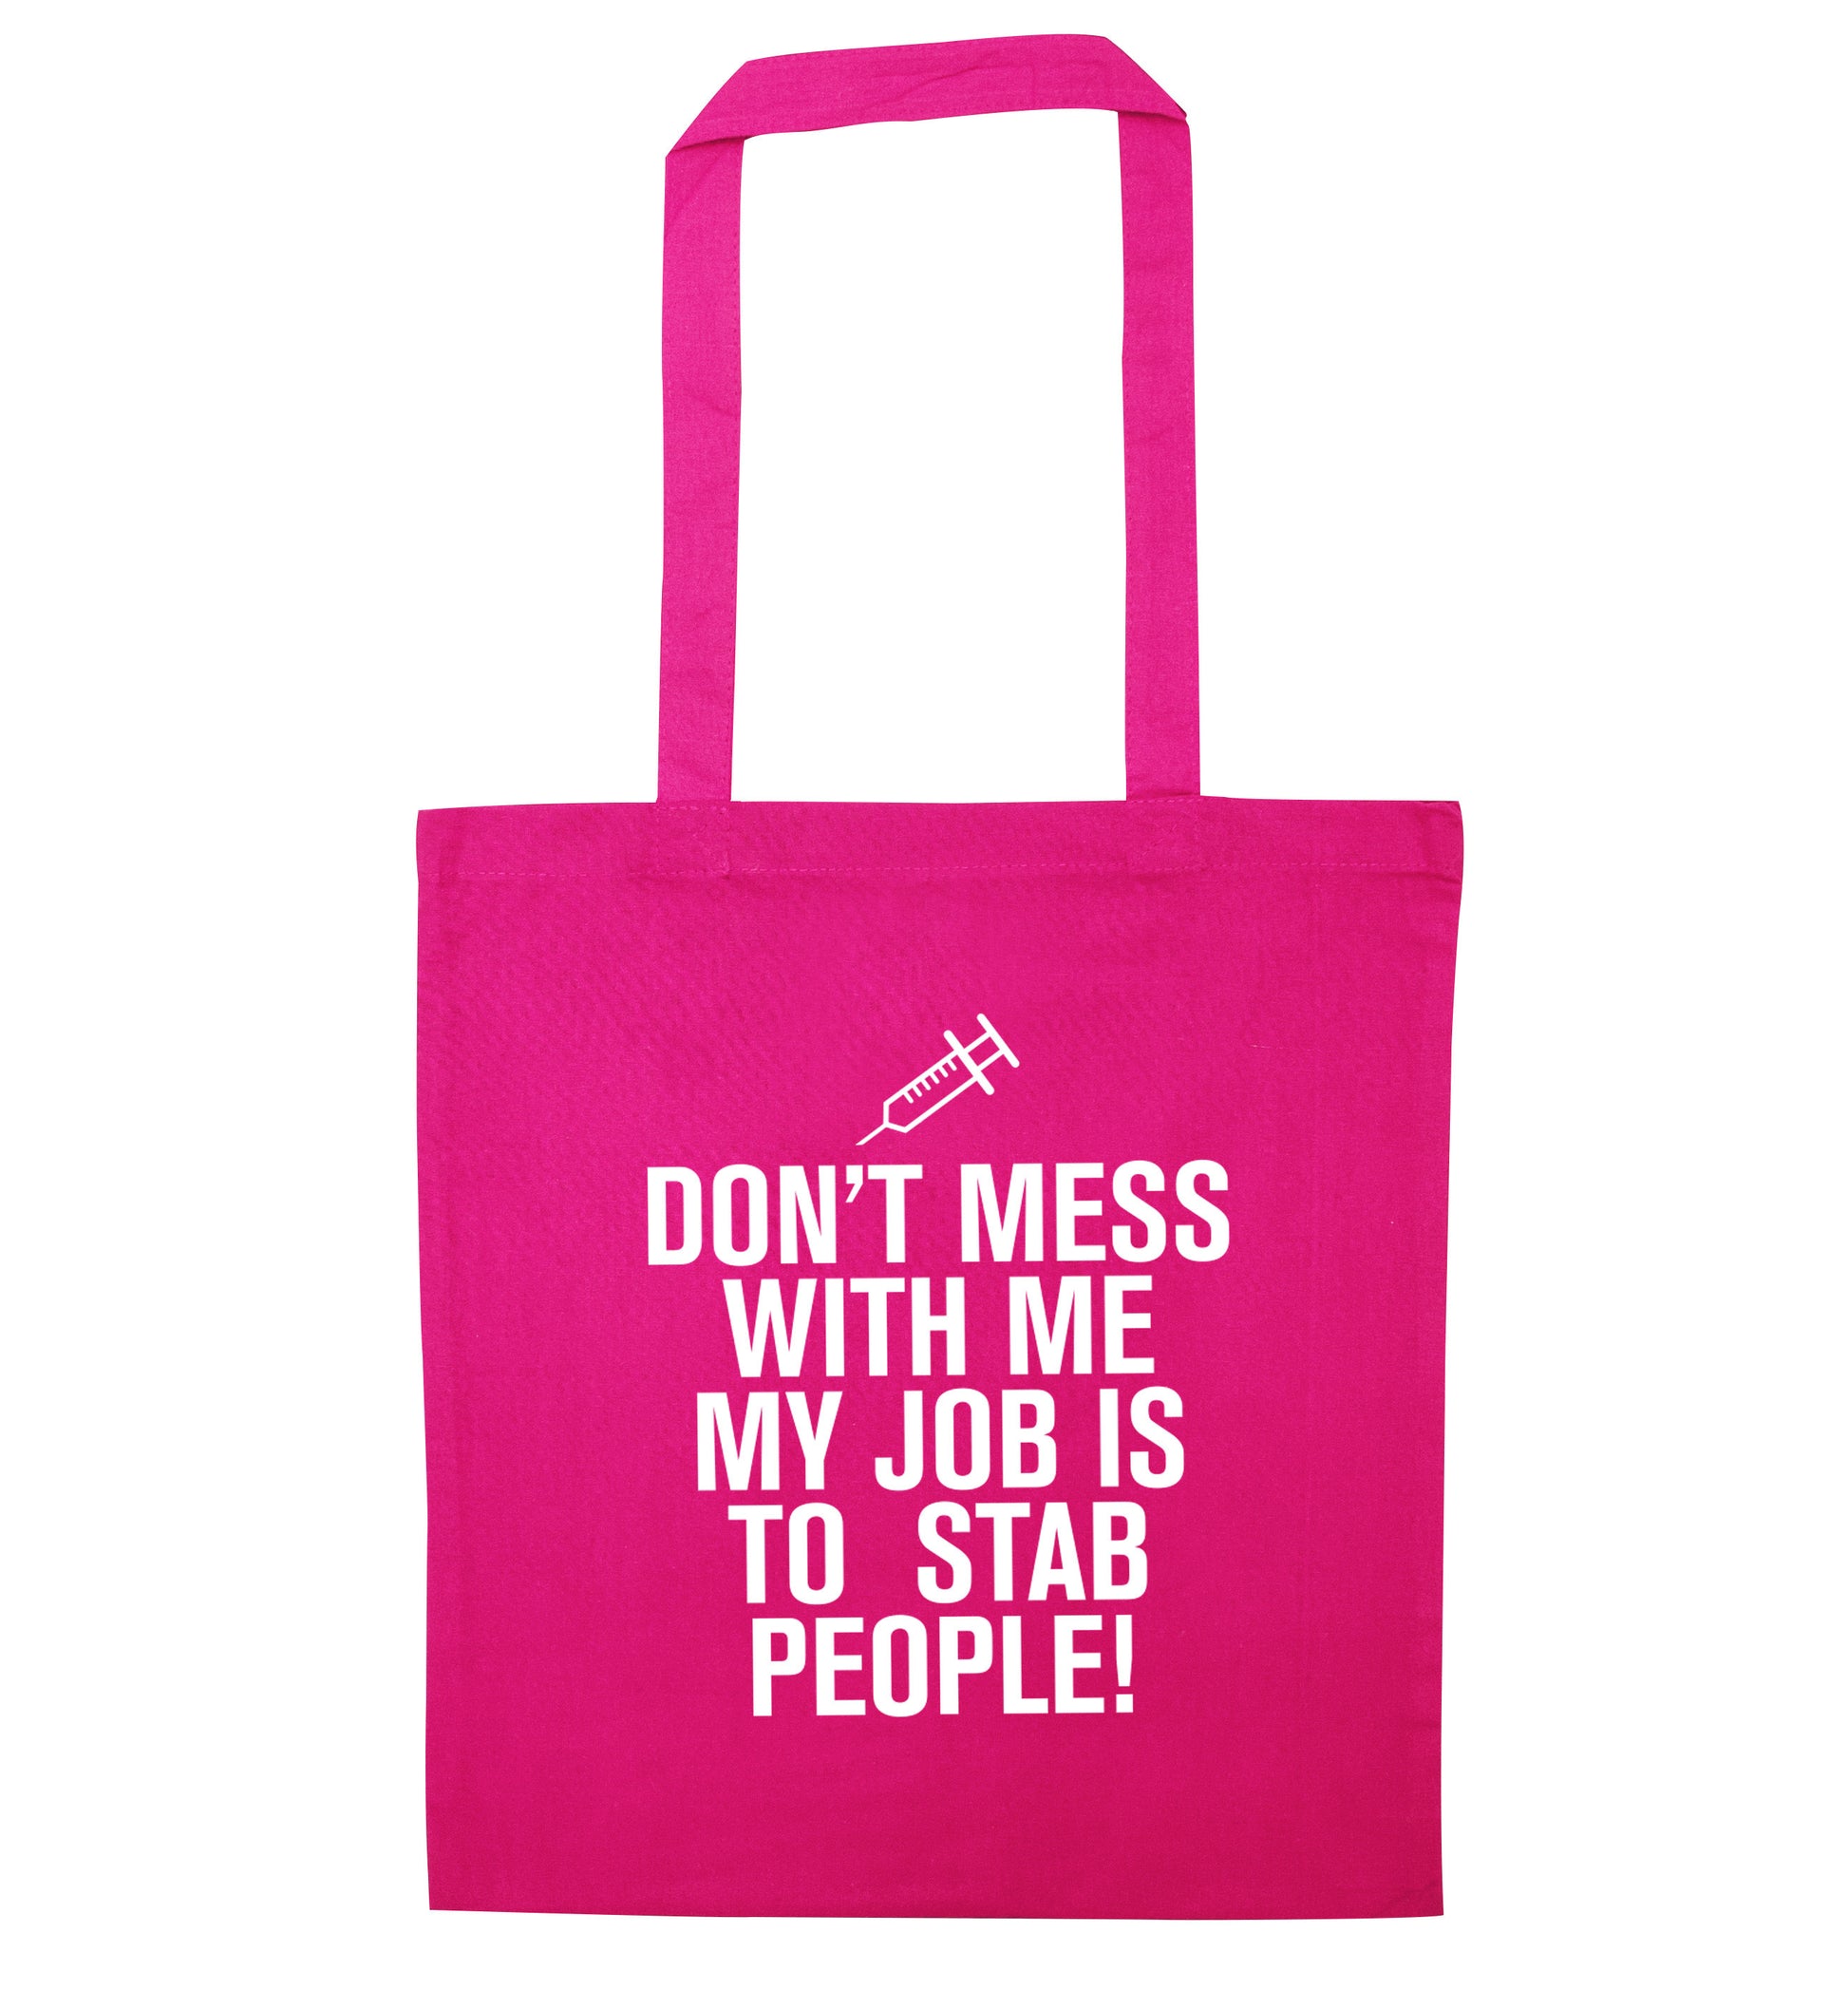 Don't mess with me my job is to stab people! pink tote bag